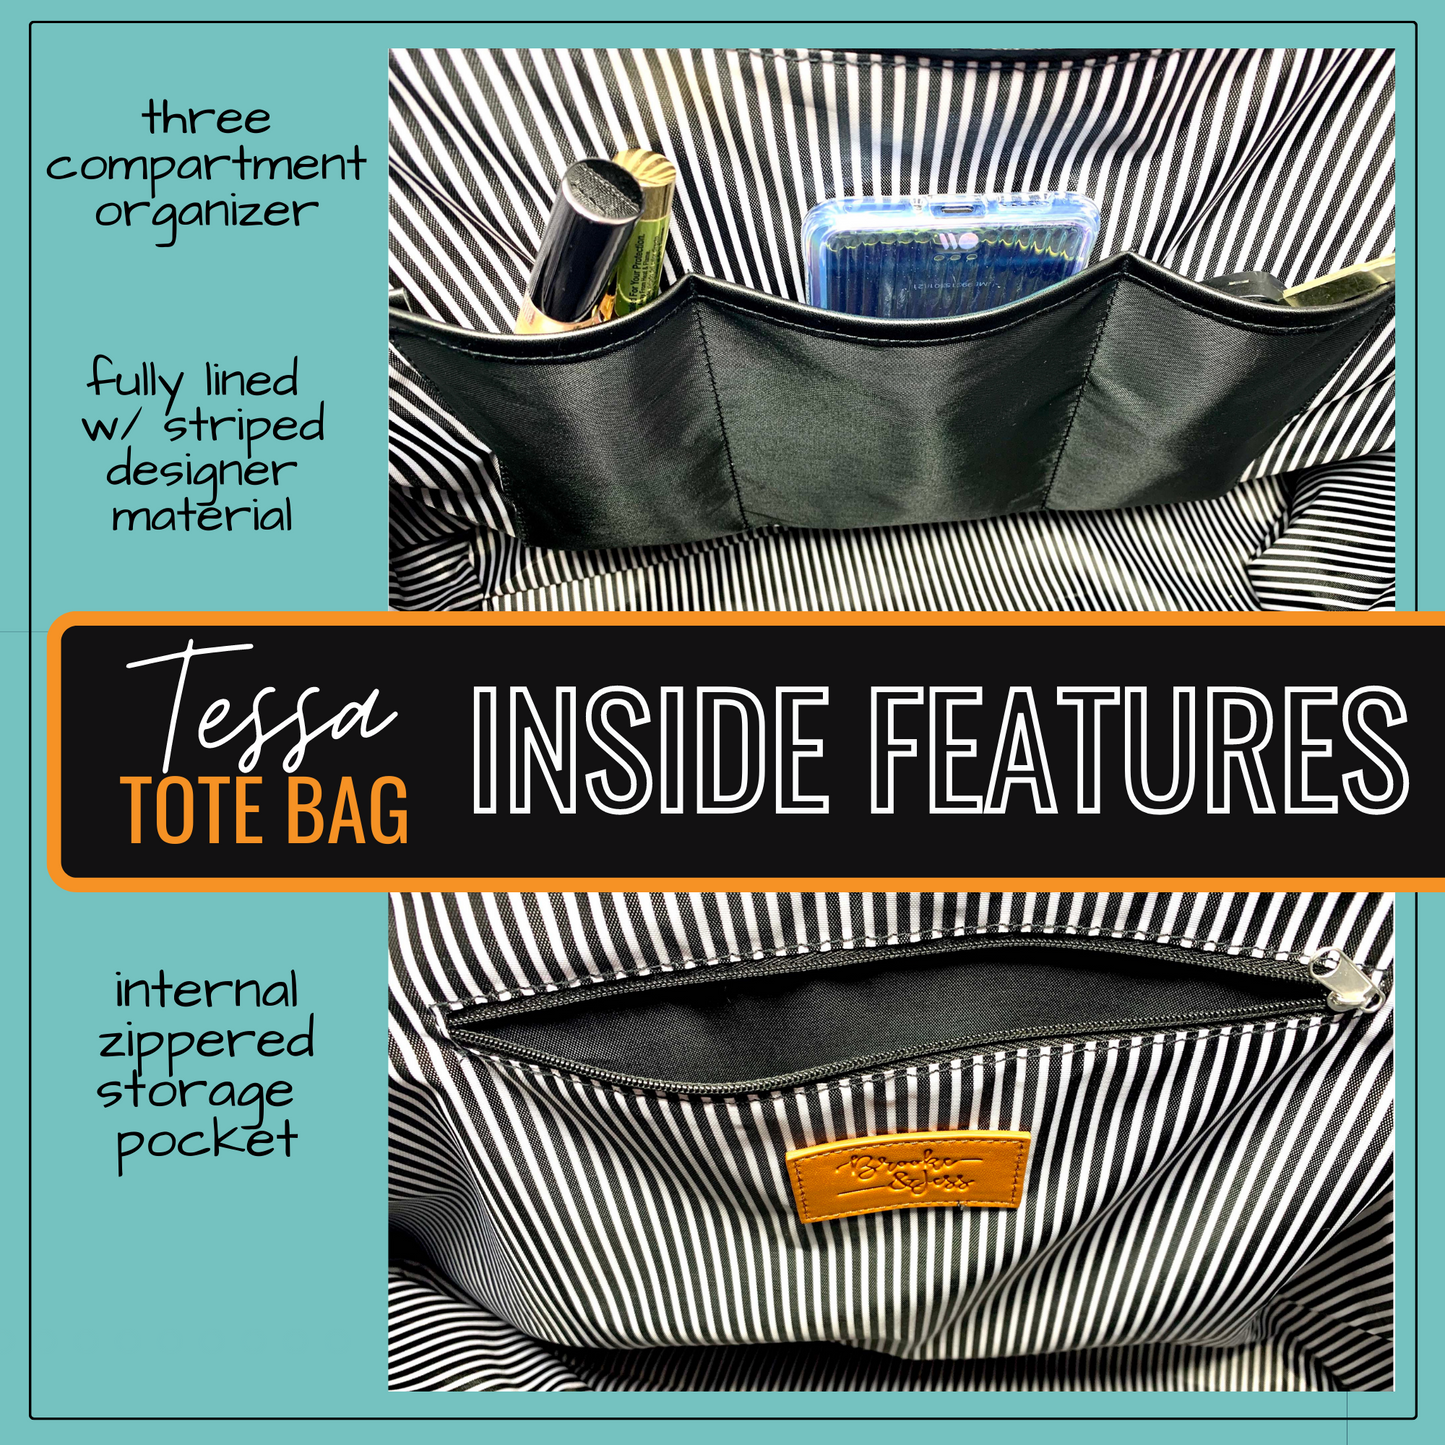 Custom-designed or personalized Brooke & Jess Designs Functional and Durable Tessa Work Bag Tote Bag with zipper and interior pockets